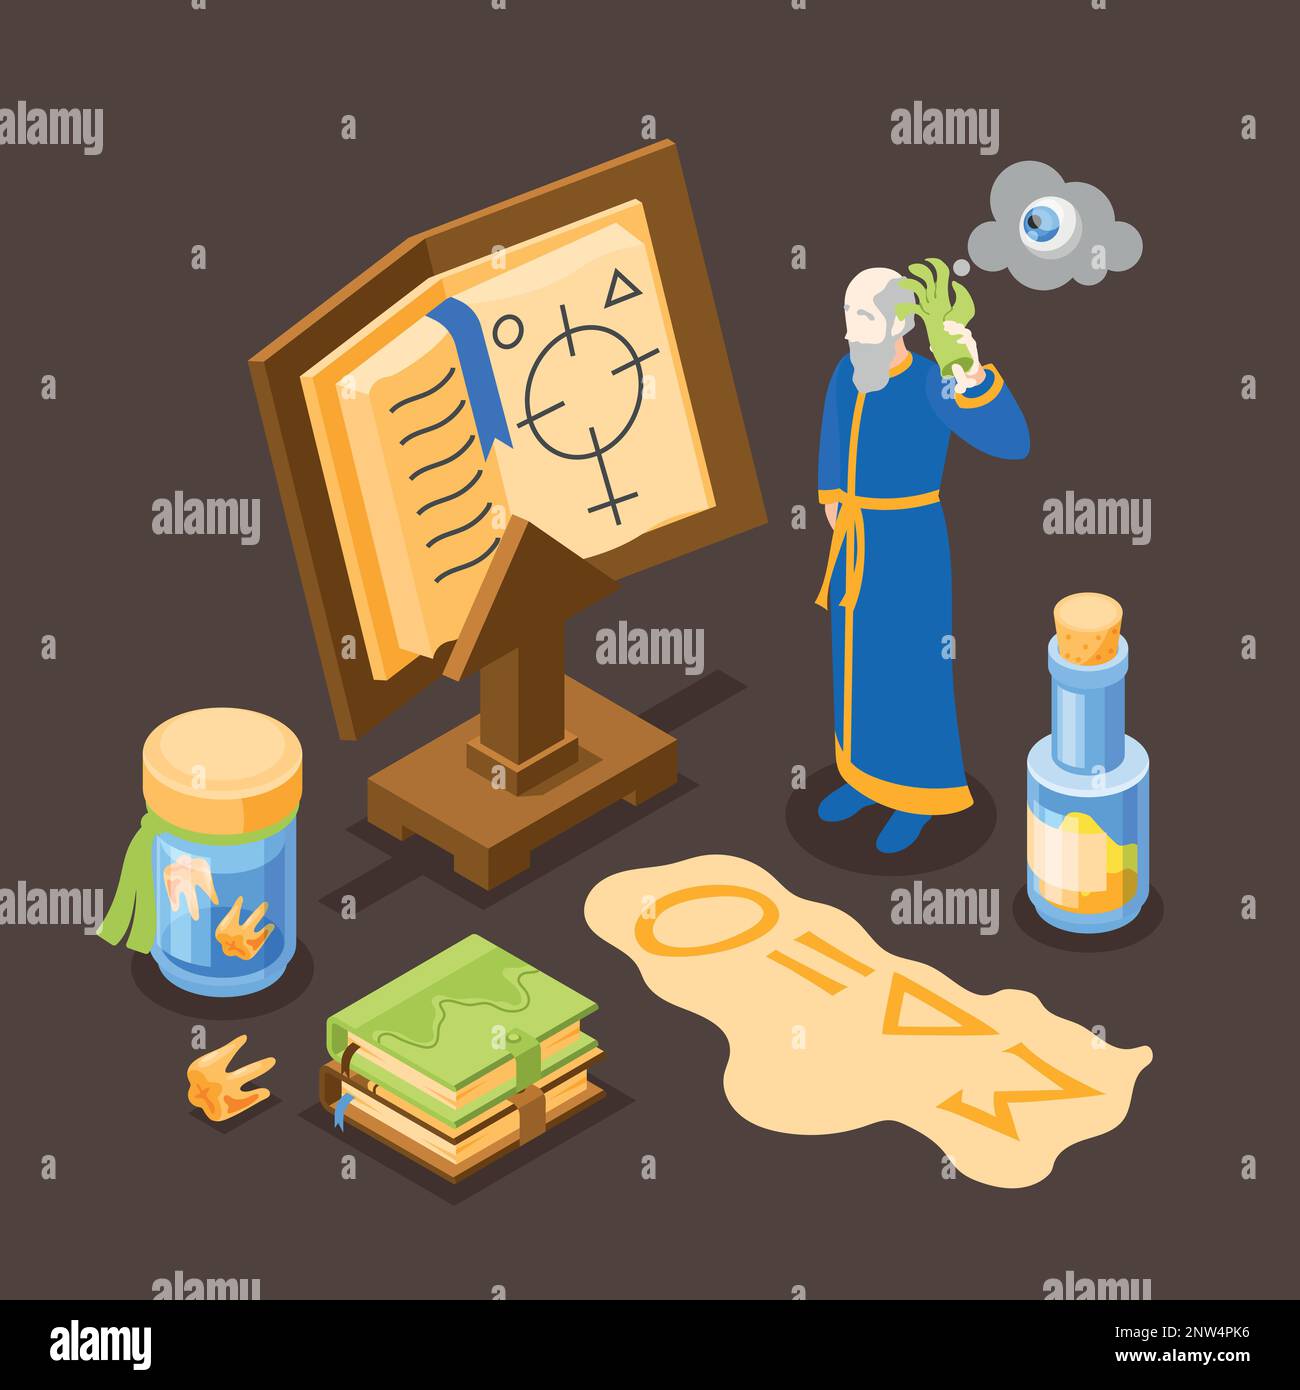 Alchemy isometric background with human character of alchemist and various tools for alchemical experiments 3d vector illustration Stock Vector